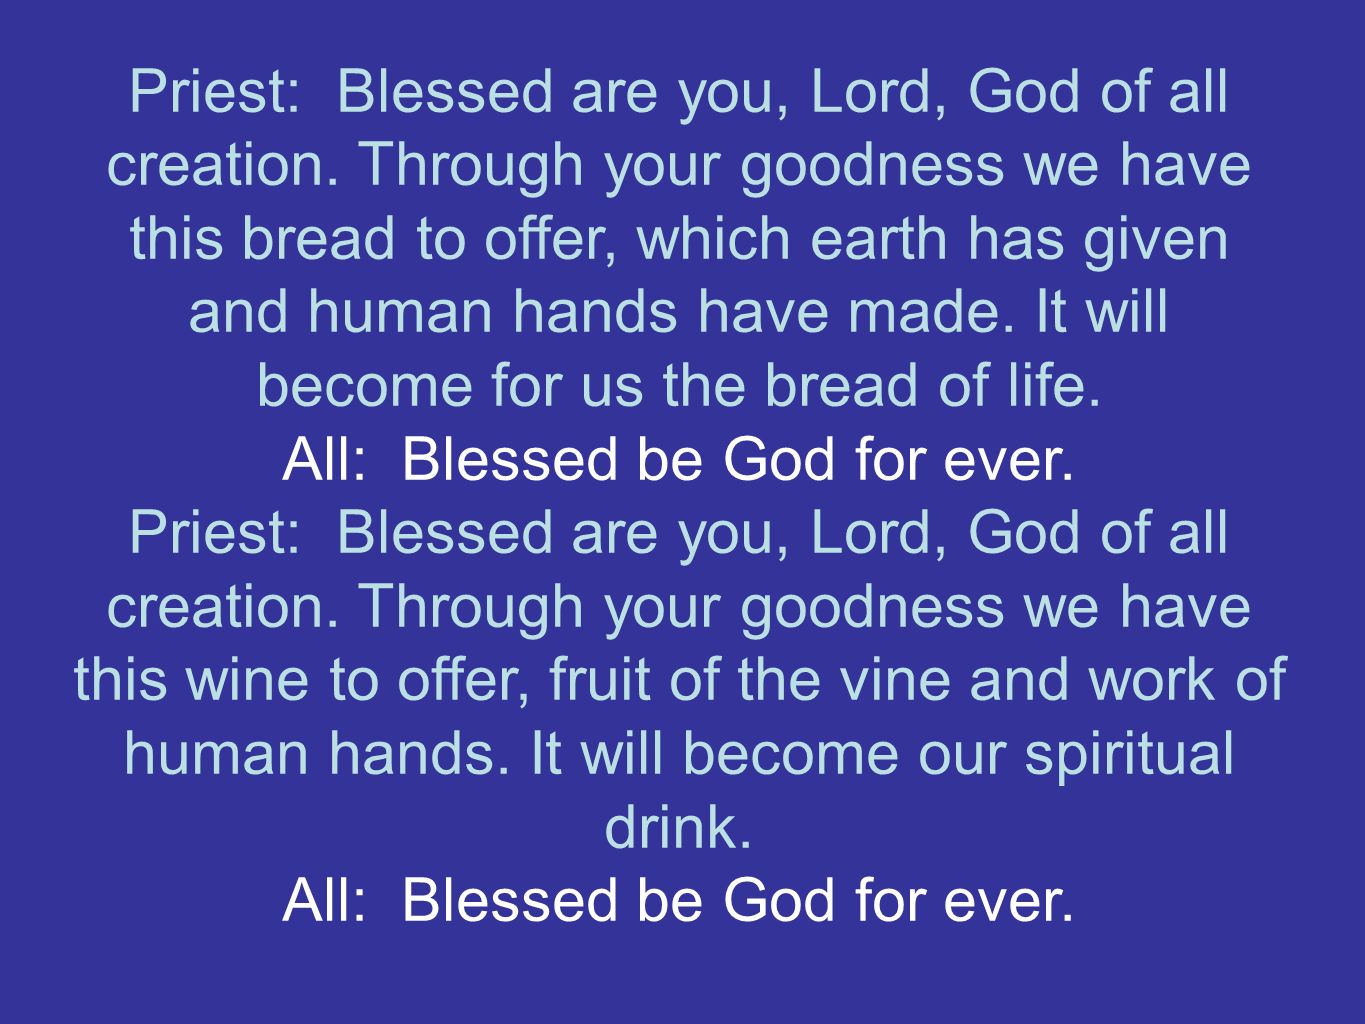 Priest: Blessed are you, Lord, God of all creation.